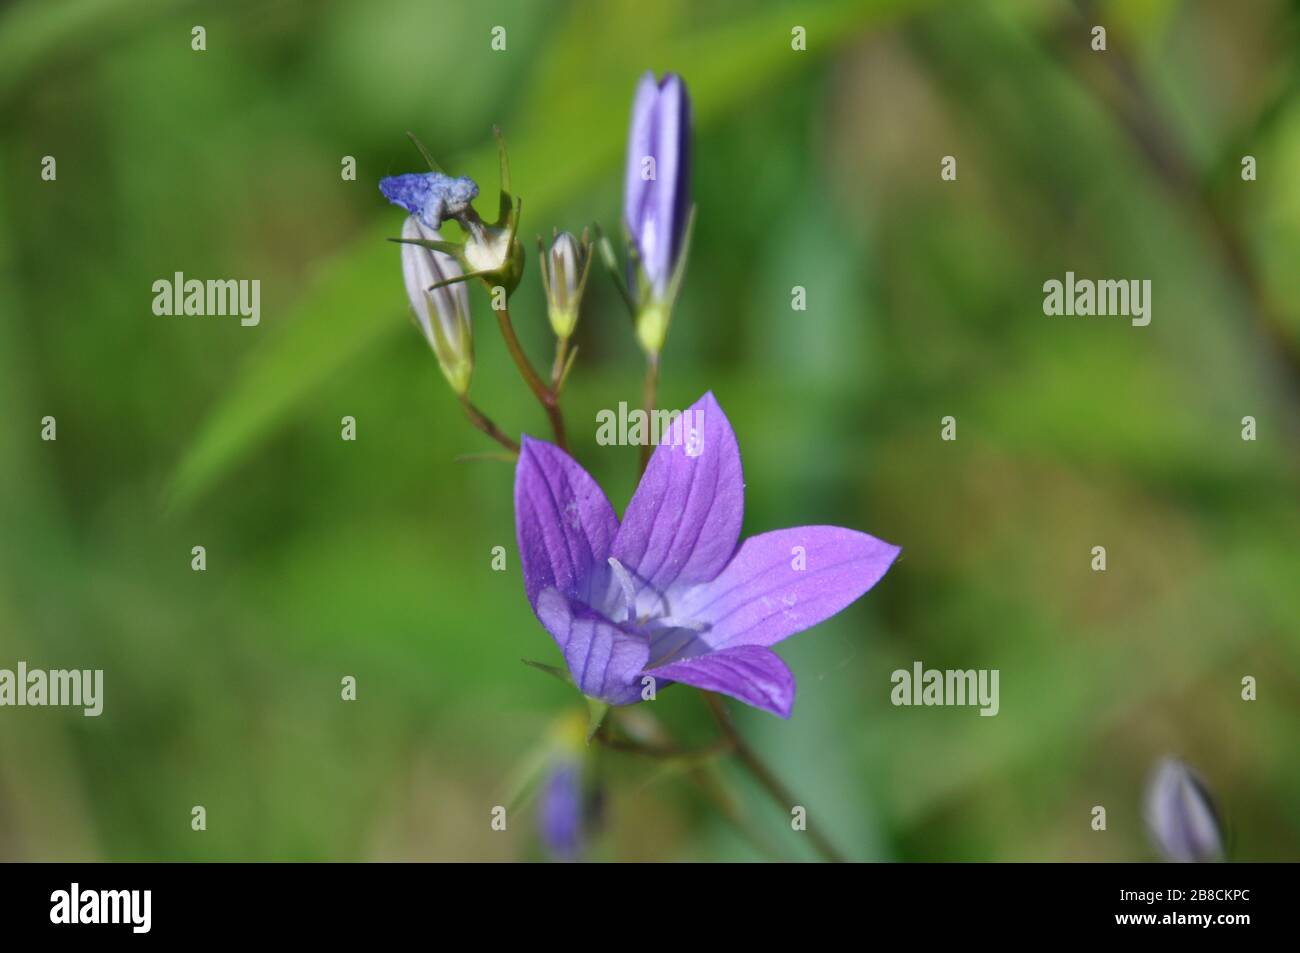 Close-up of Campanula patula flowers. This plant is known as spreading bellflower. Stock Photo